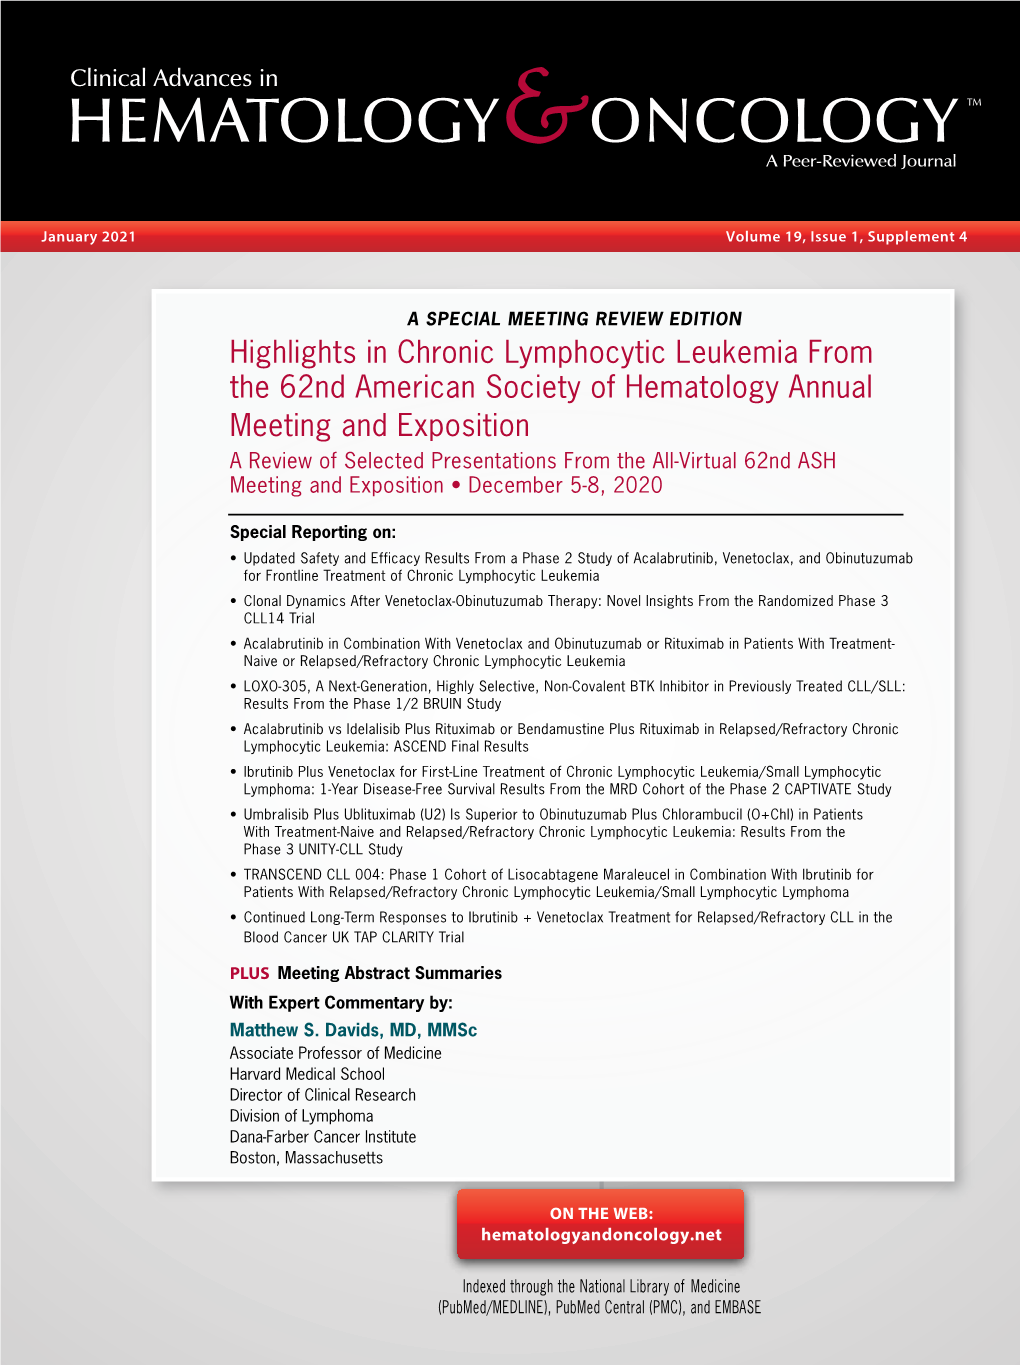 Highlights in Chronic Lymphocytic Leukemia from the 62Nd American